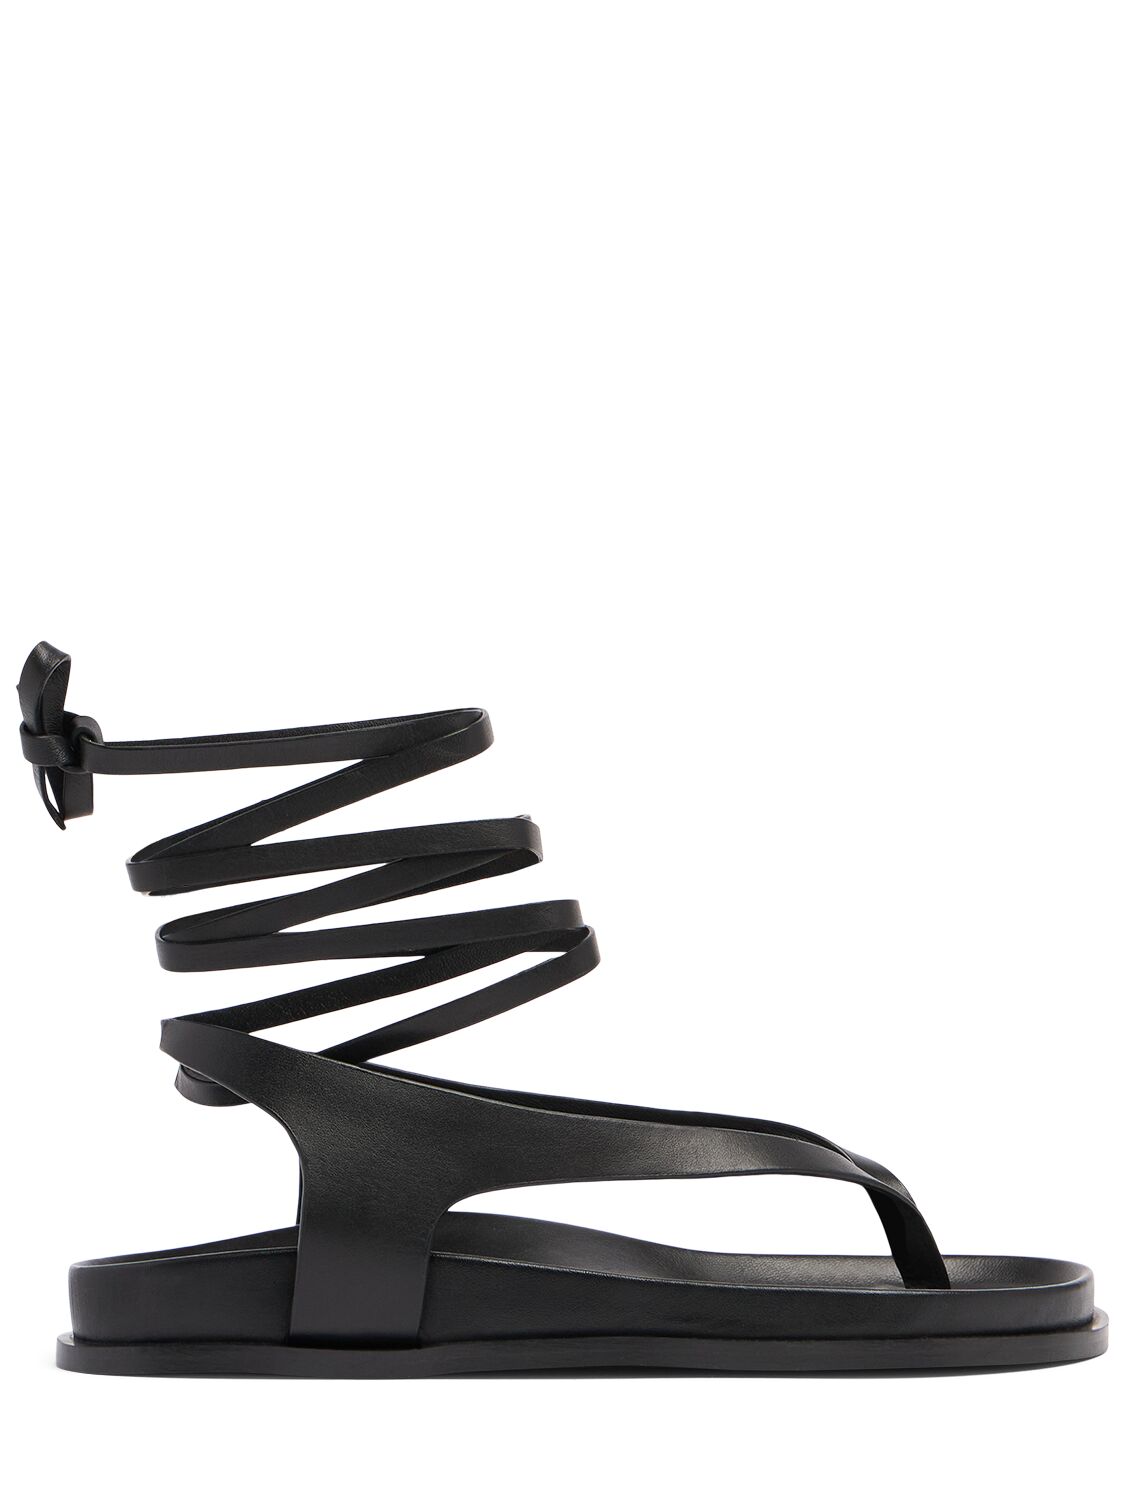 A.emery Leather Wrap Shel Sandals In Black